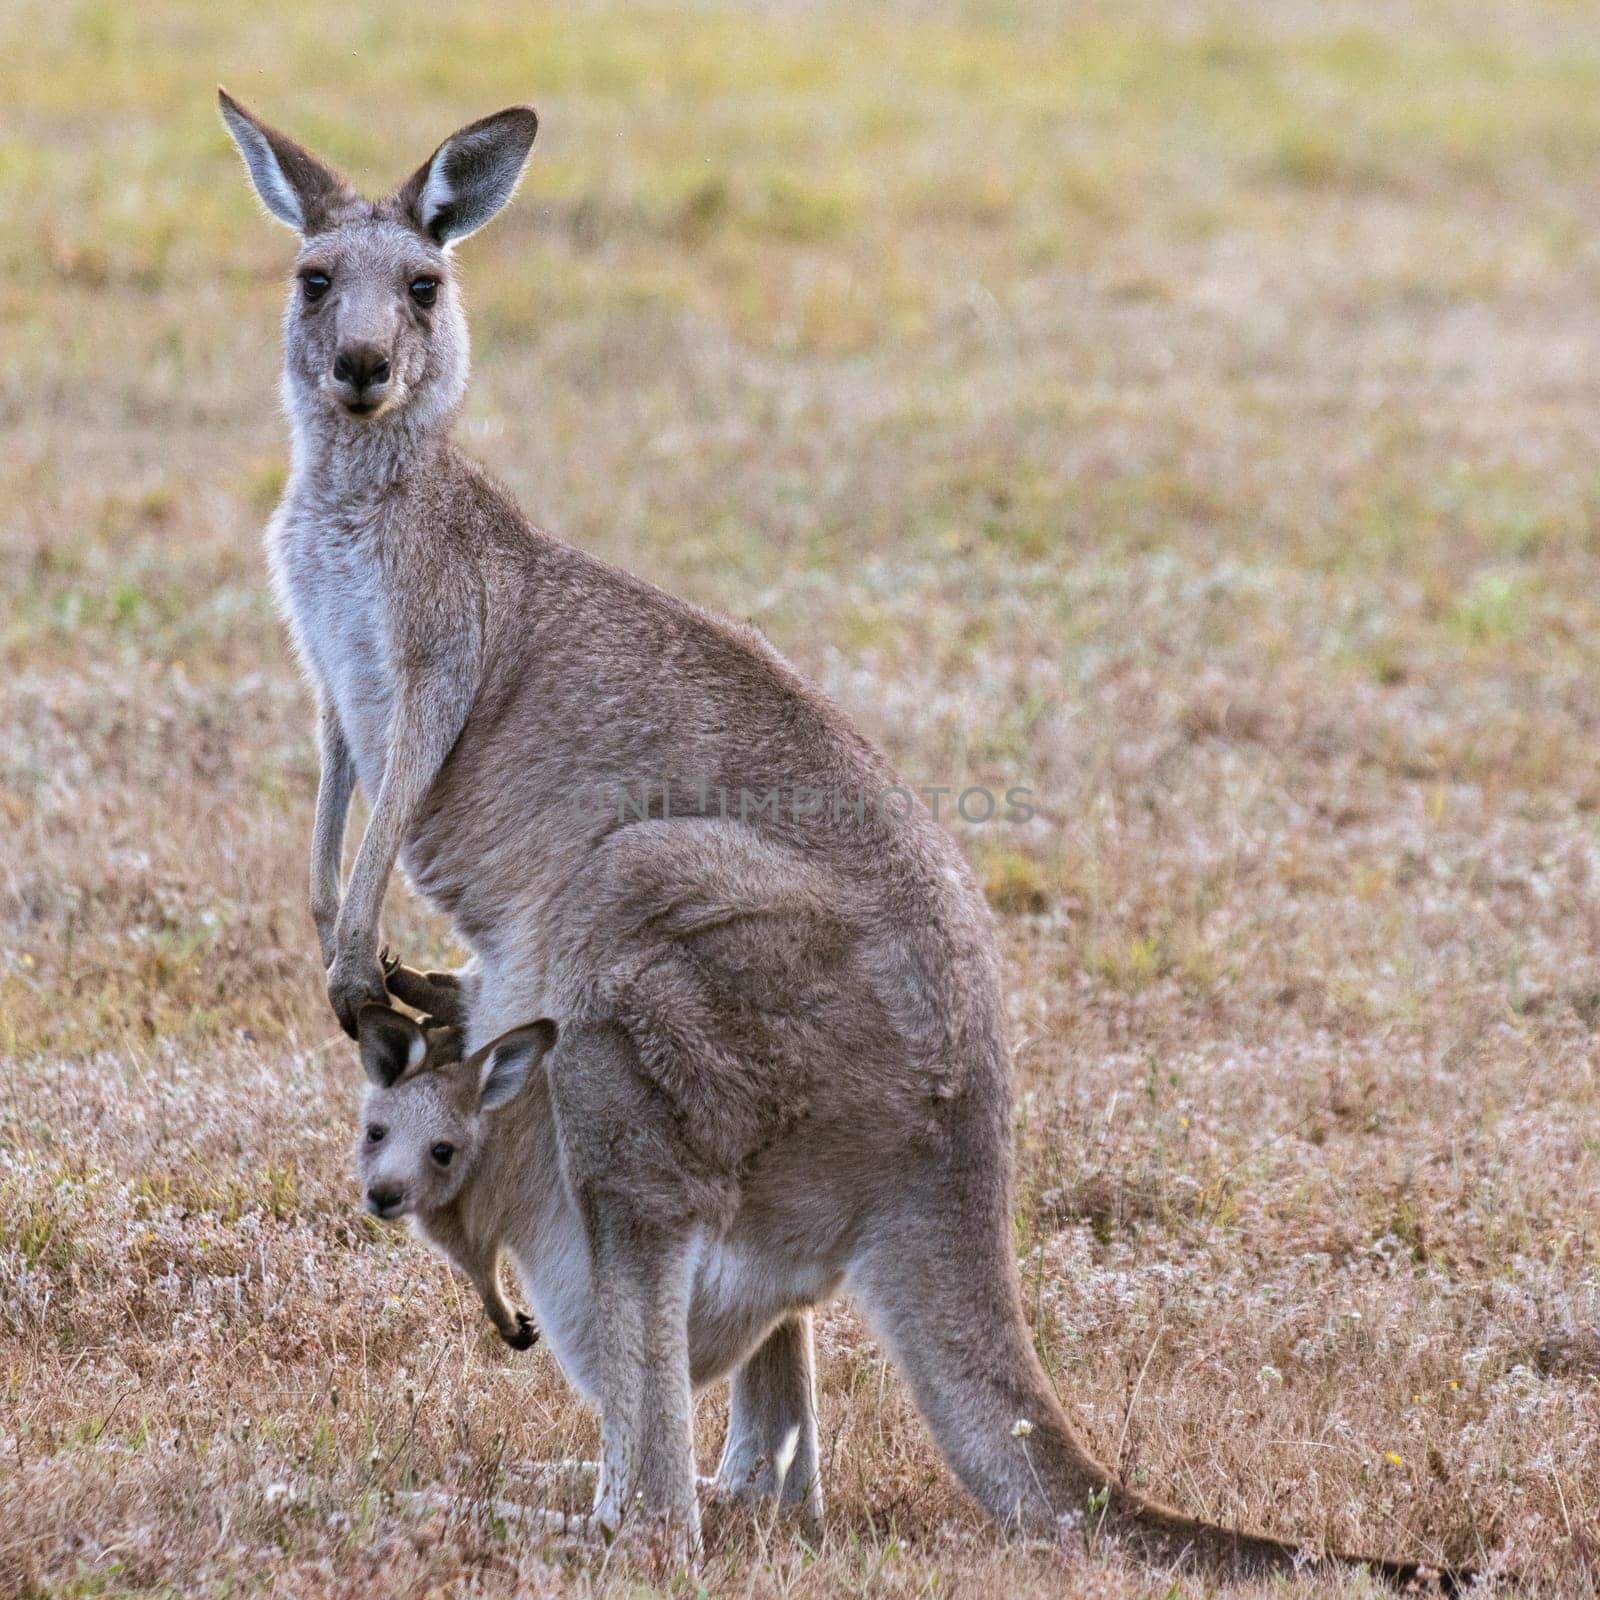 Female east gray kangaroo looking at camera with curious joey in marsupial pouch.